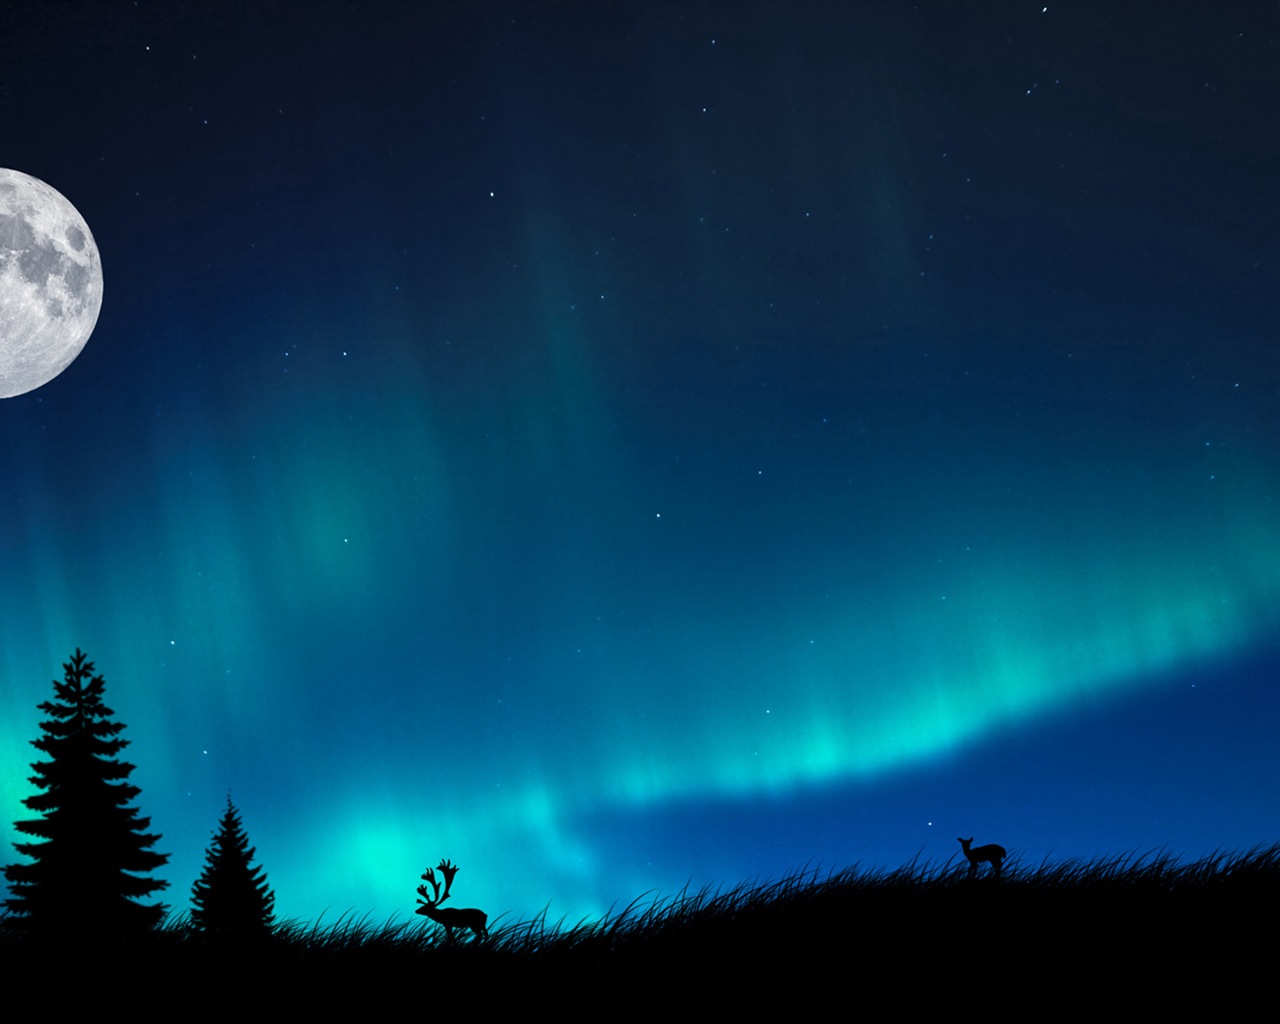 Natural wonders of the Northern Lights HD Wallpaper (1) #13 - 1280x1024